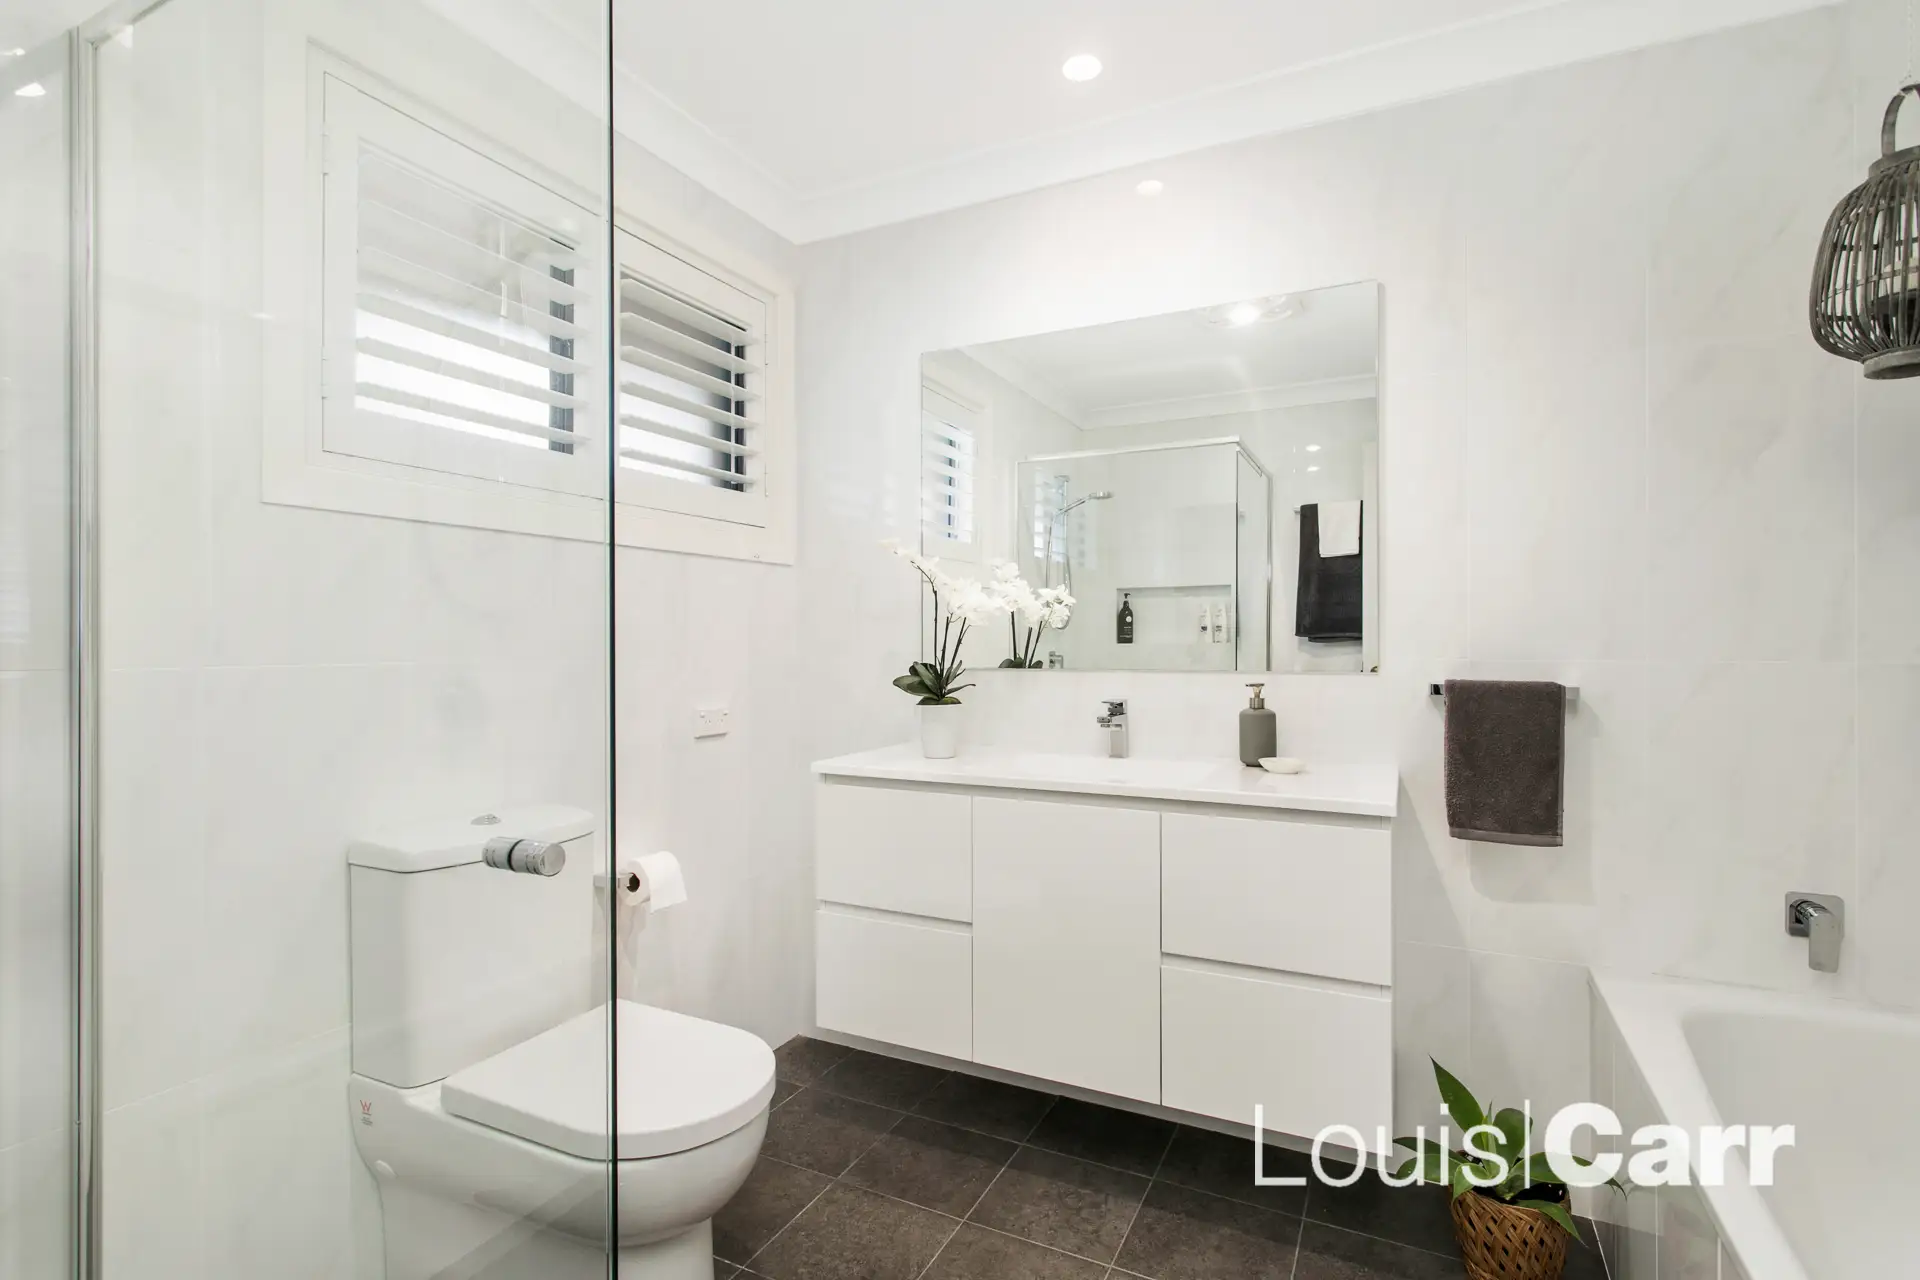 Photo #9: 27 Tallowwood Avenue, Cherrybrook - Sold by Louis Carr Real Estate